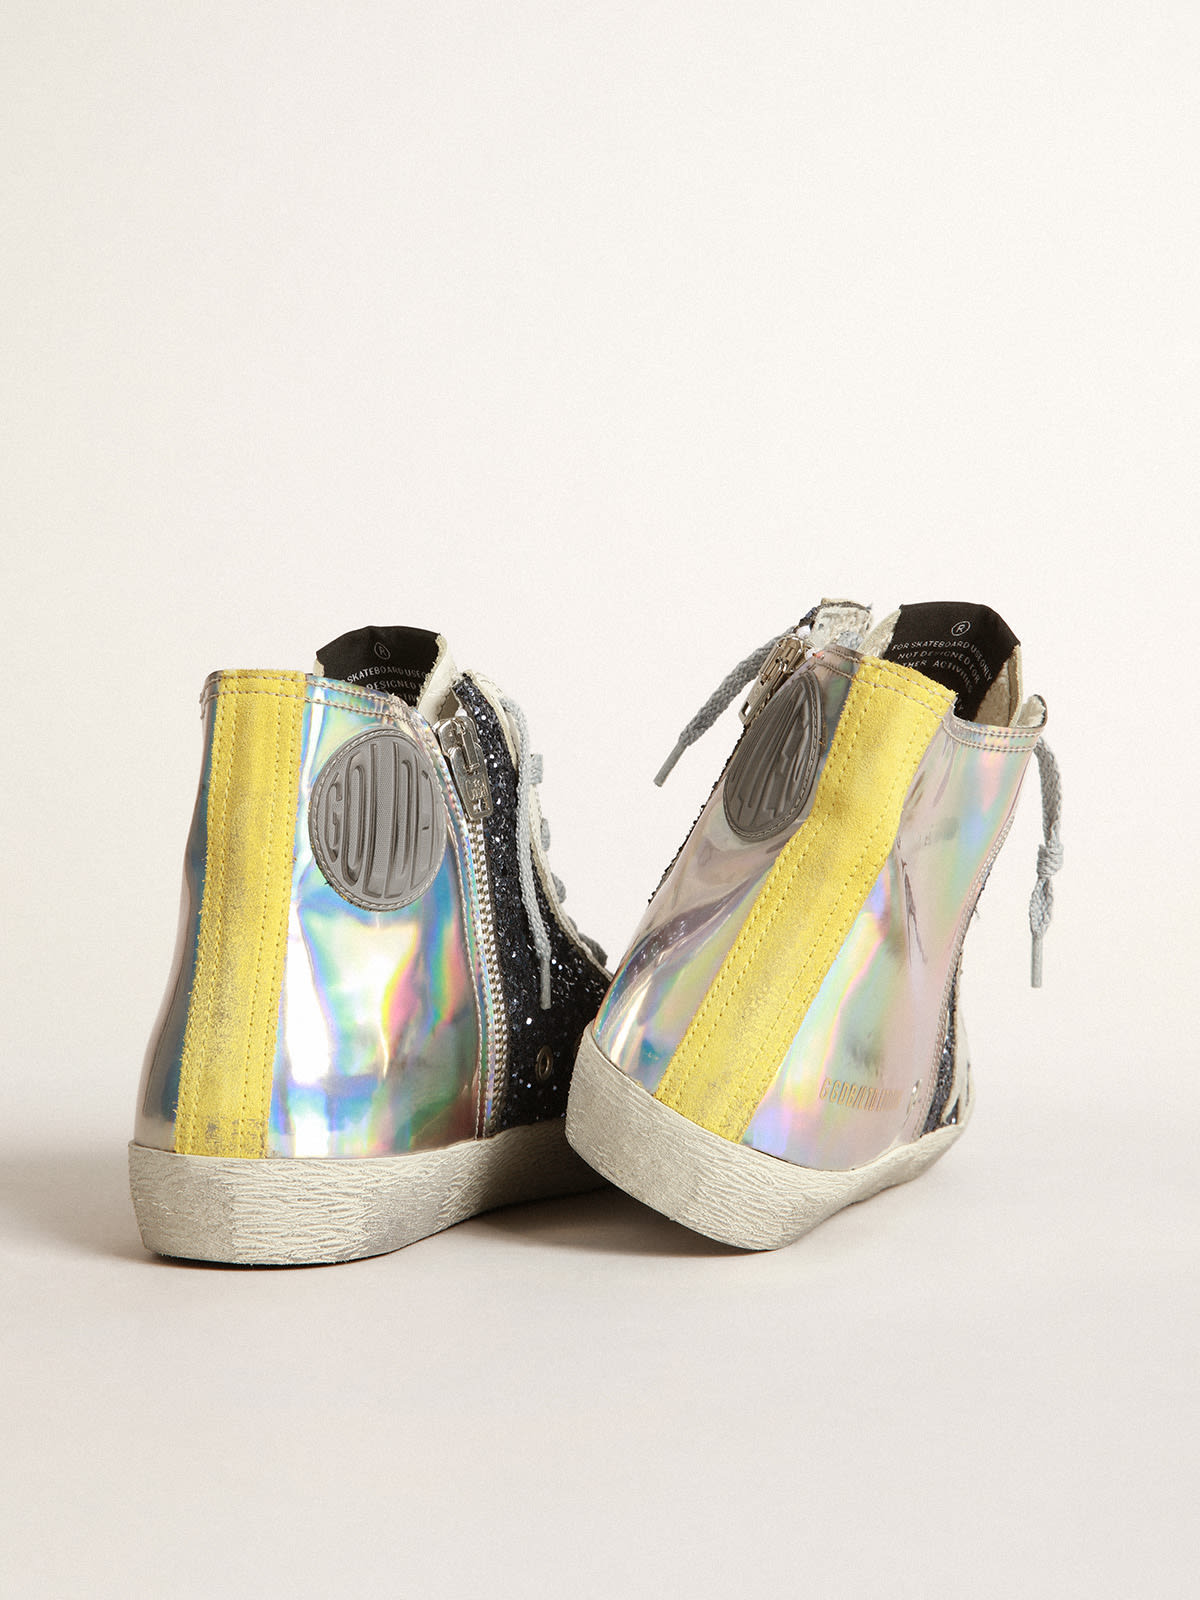 Golden Goose - LAB Limited Edition Francy women's holographic sneakers with glitter in 